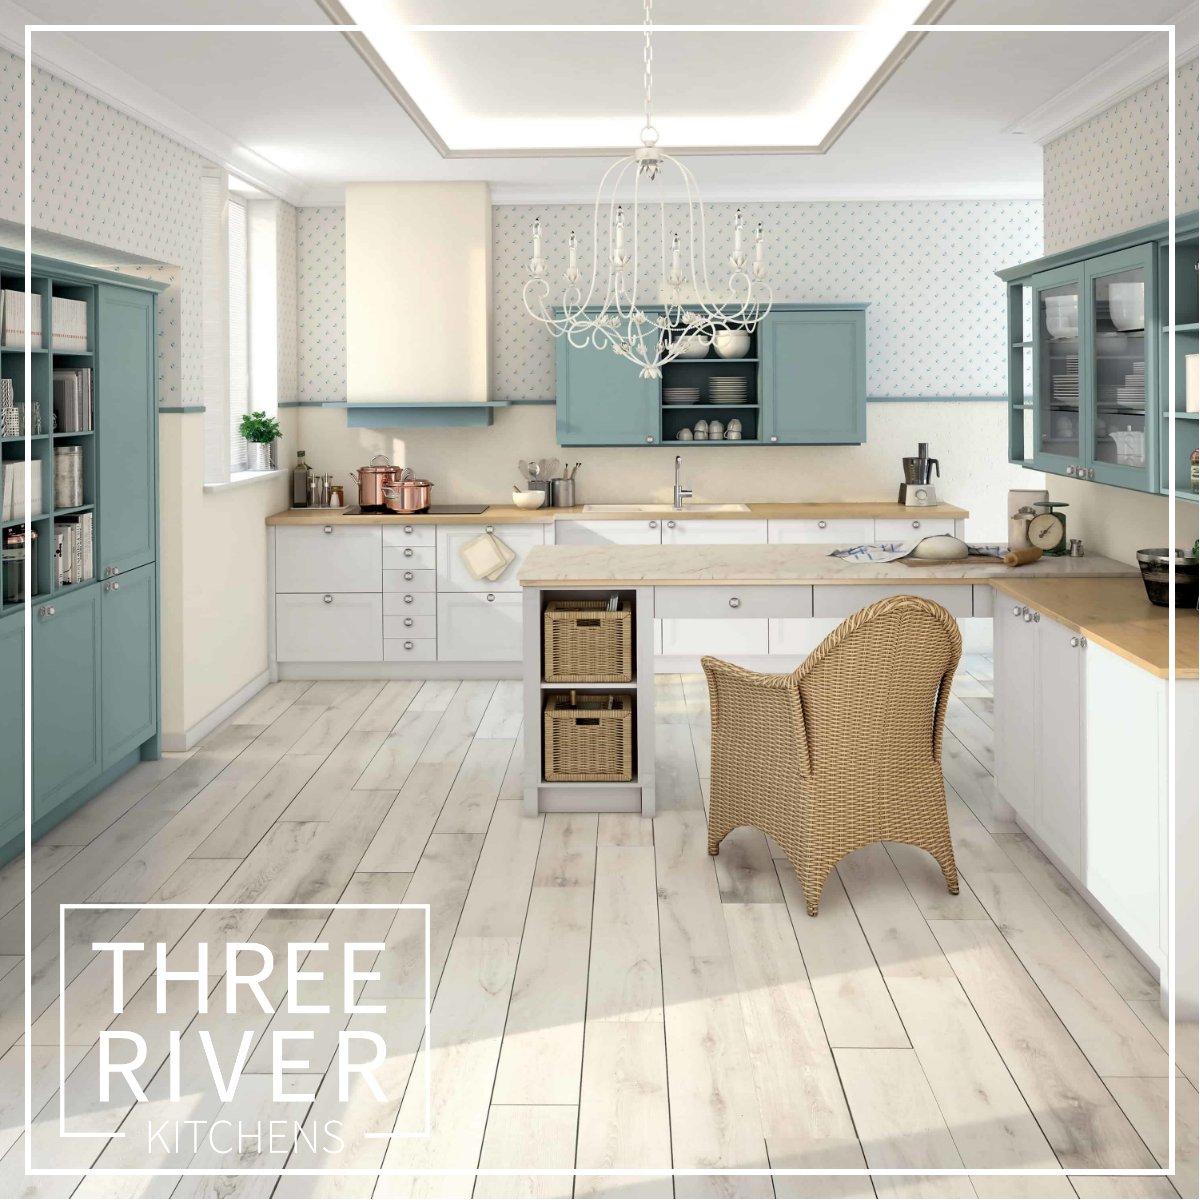 Transform your home with the classic appeal of a traditional kitchen by Three River Kitchens. Book a consultation for timeless design.  #kitchendesign #kitchenideas #kitchendesignideas #kitchendesigner #kitchendesigntrends #essexbusiness #essexkitchens #chelmsfordbusiness